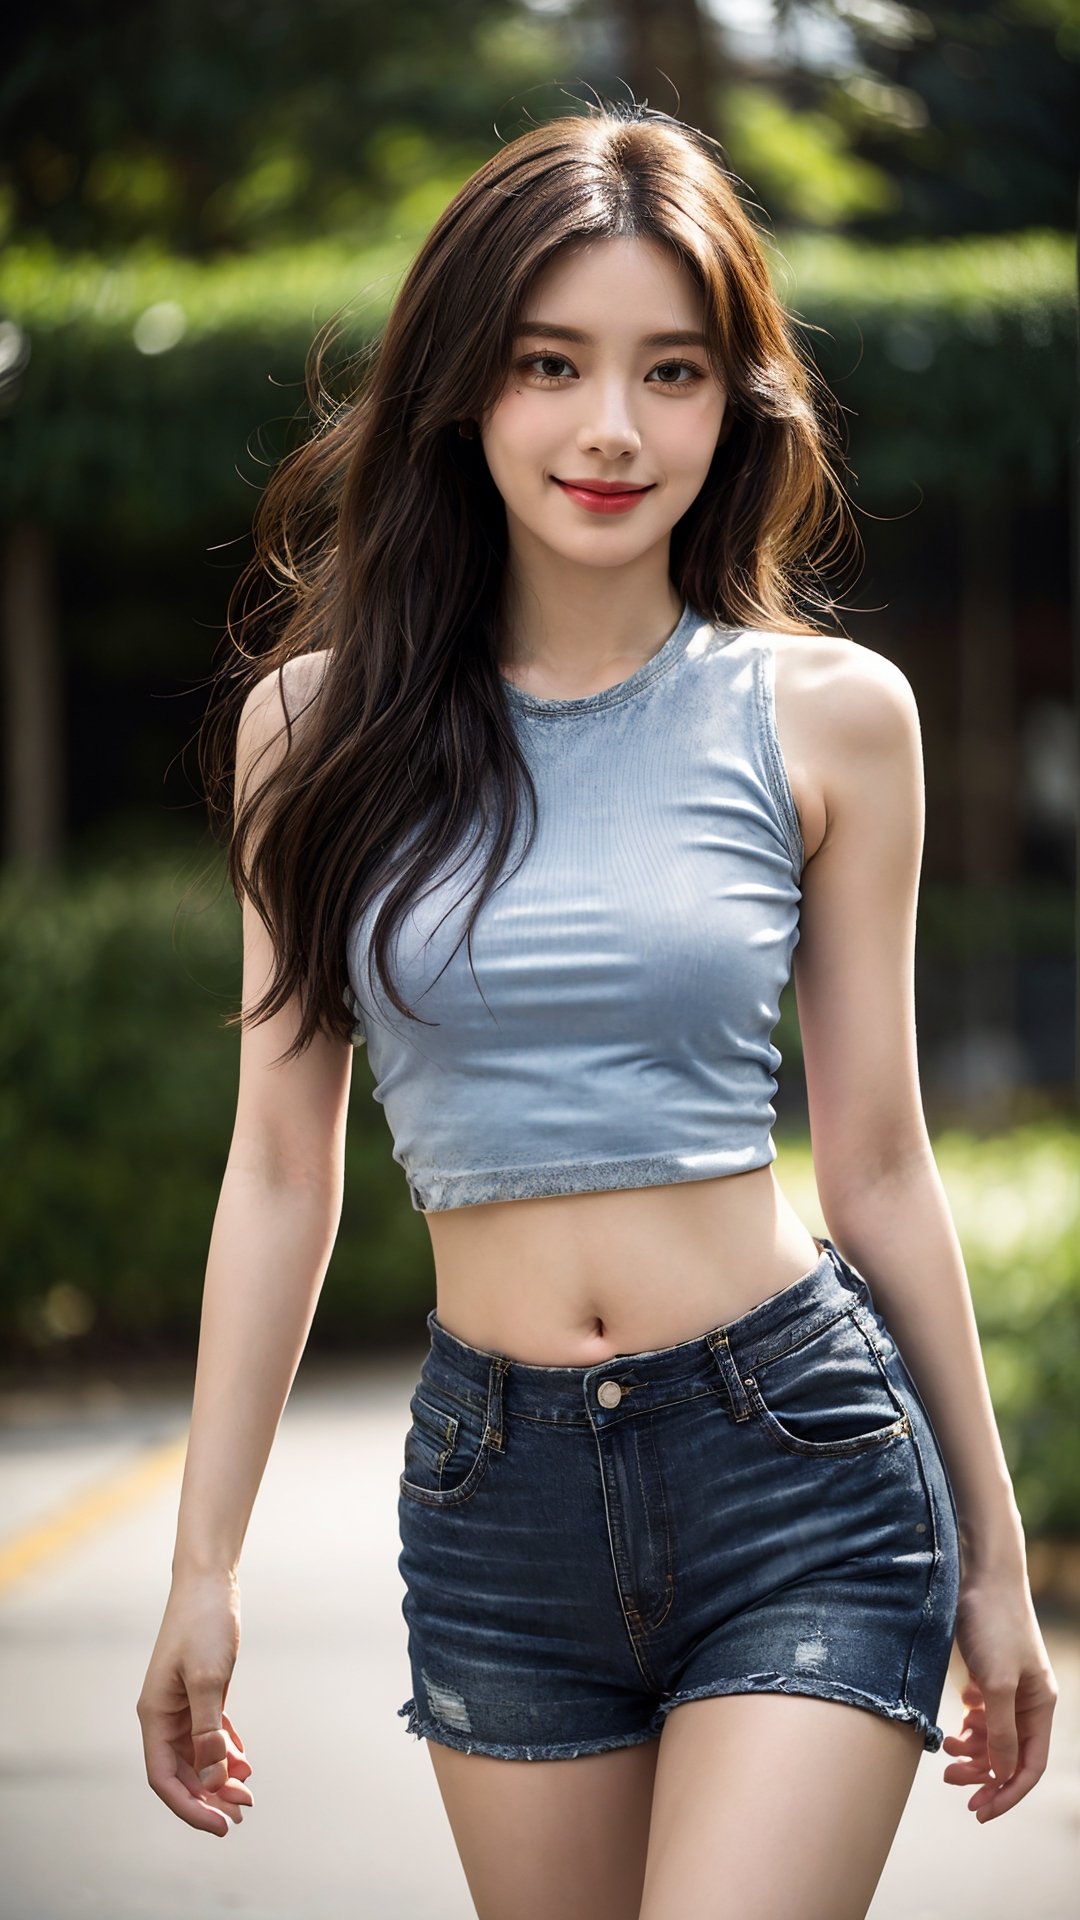 masterpiece, best quality, photorealistic, raw photo, 1girl, beautiful face, light smile, long hair, crop top shirt, navel, midriff, open denim shorts, sneakers, fullbody_view, walking on public park, intricate detailed, alluring face, detailed skin, pore, detailed background, finely detailed, dslr